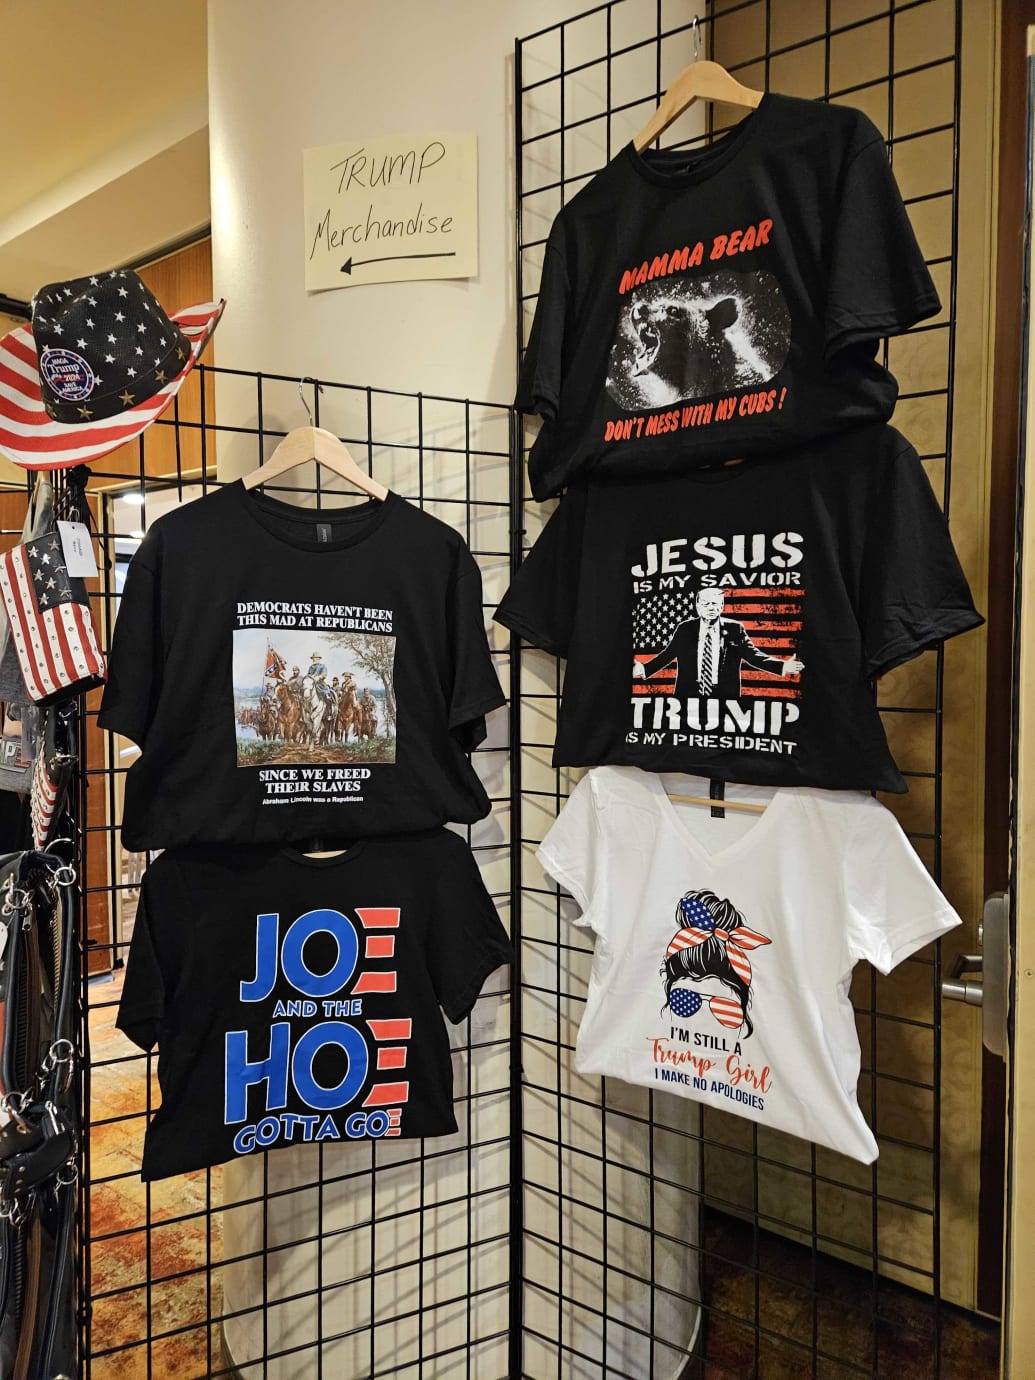 Merchandise at the Moms for Liberty summit in Philly included T-shirts about Jesus, Trump, and Joe Biden. 